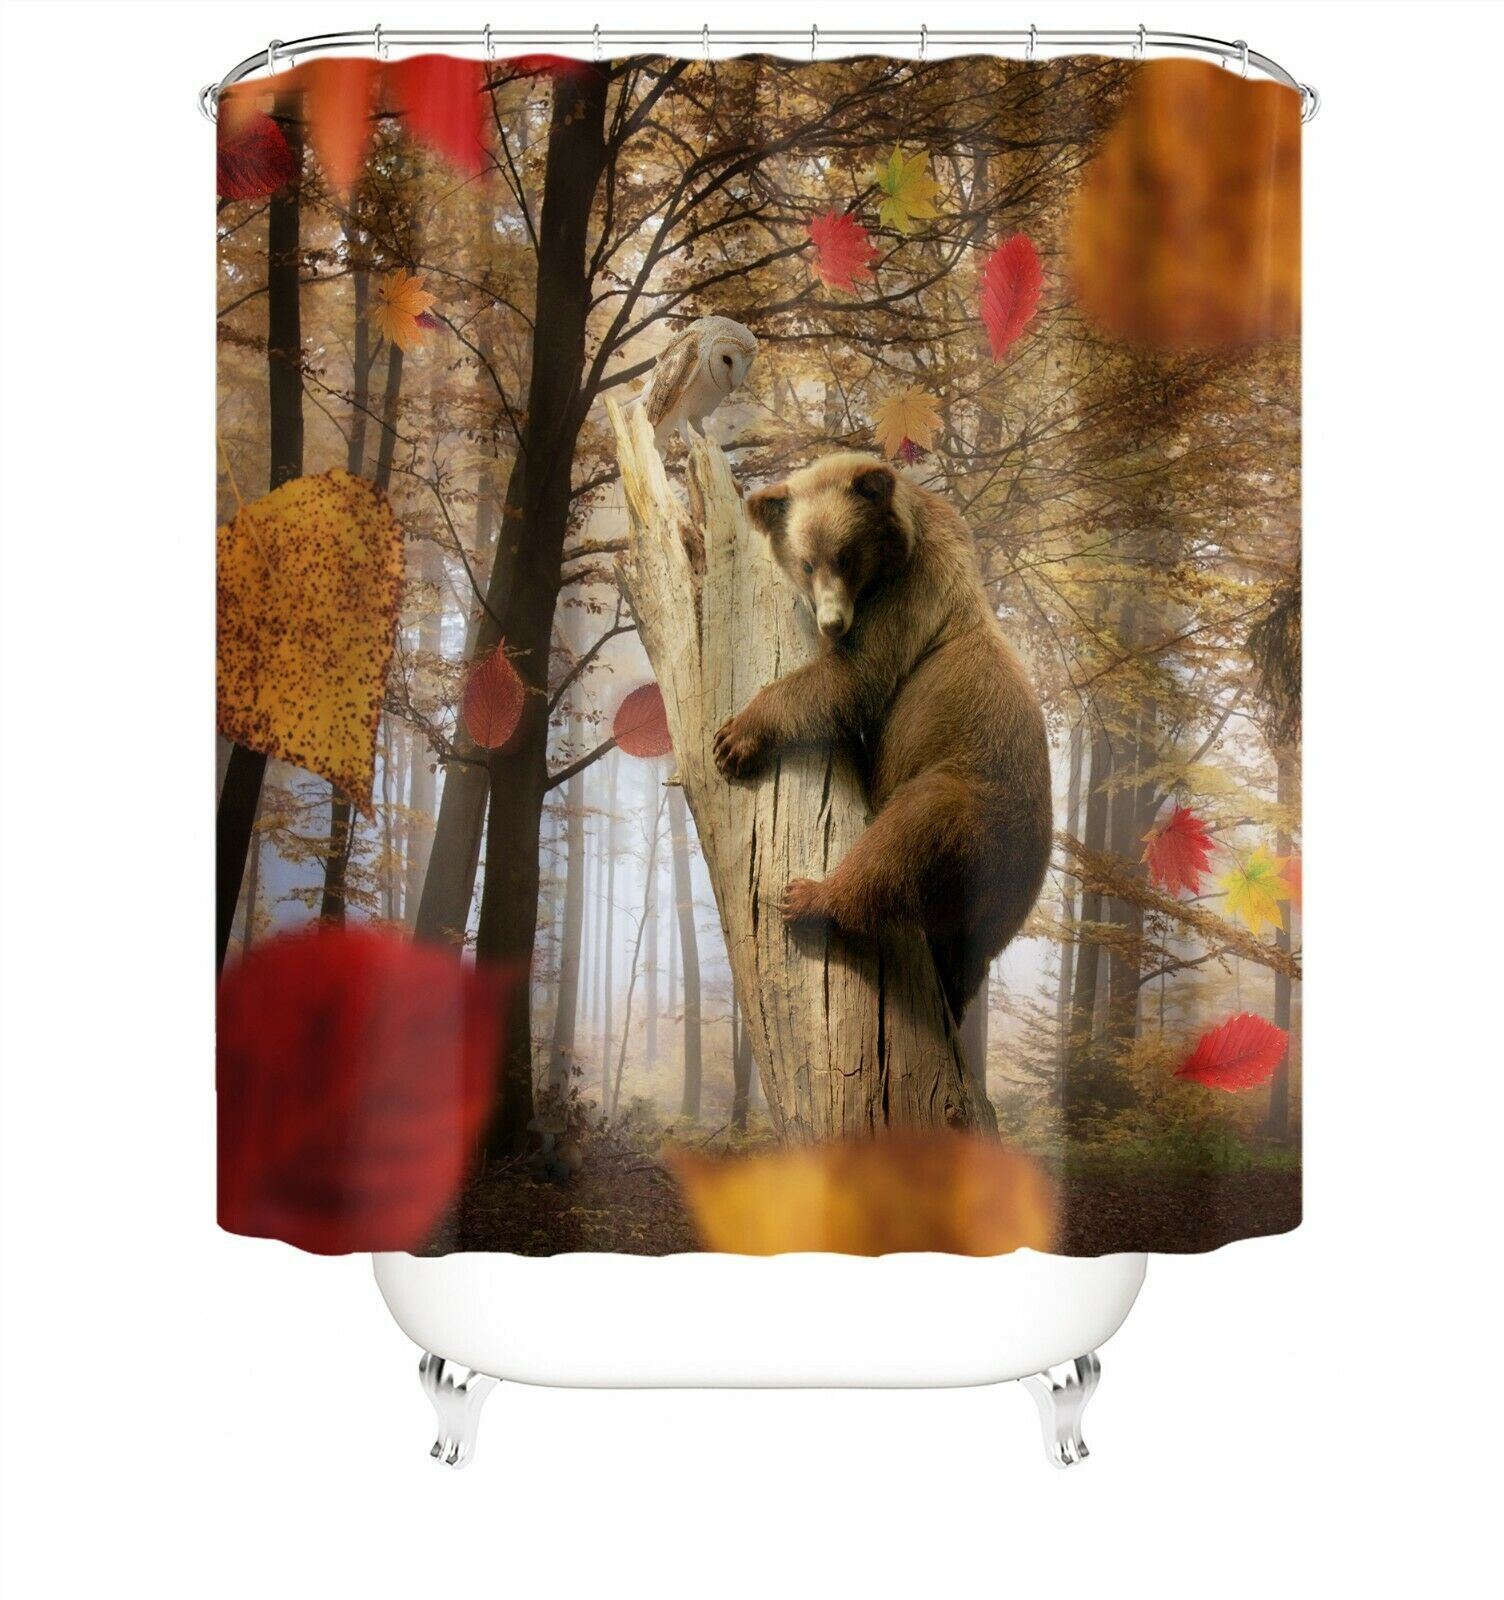 Bear Shower Curtain Set Bathroom Rugs Thick Bath Mat Non-Slip Toilet Lid Cover-180×180cm Shower Curtain Only-Free Shipping at meselling99